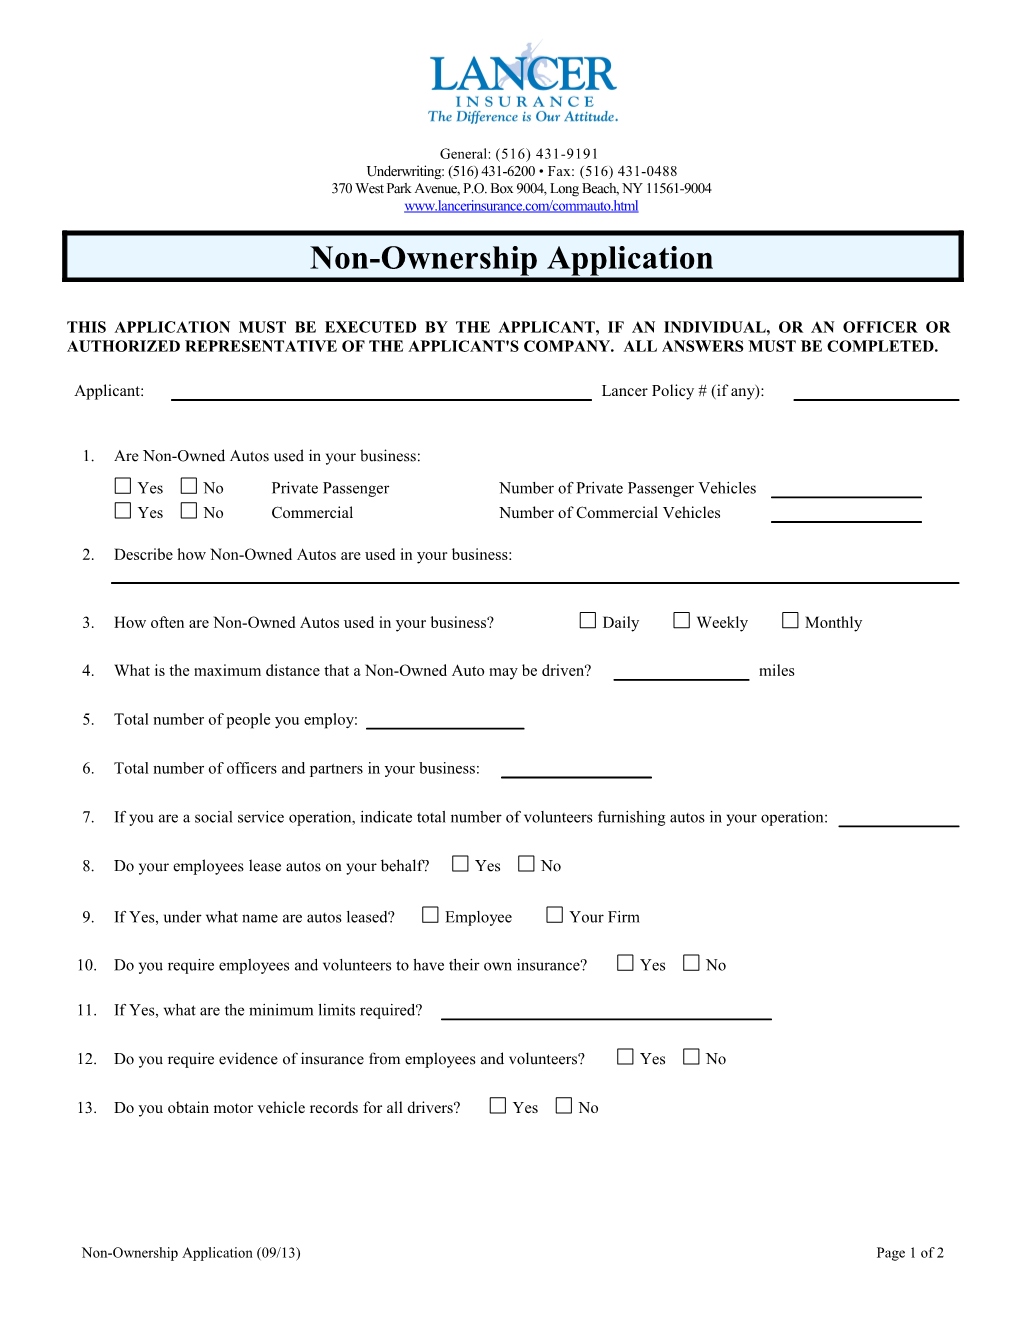 Non-Owned Auto Questionnaire